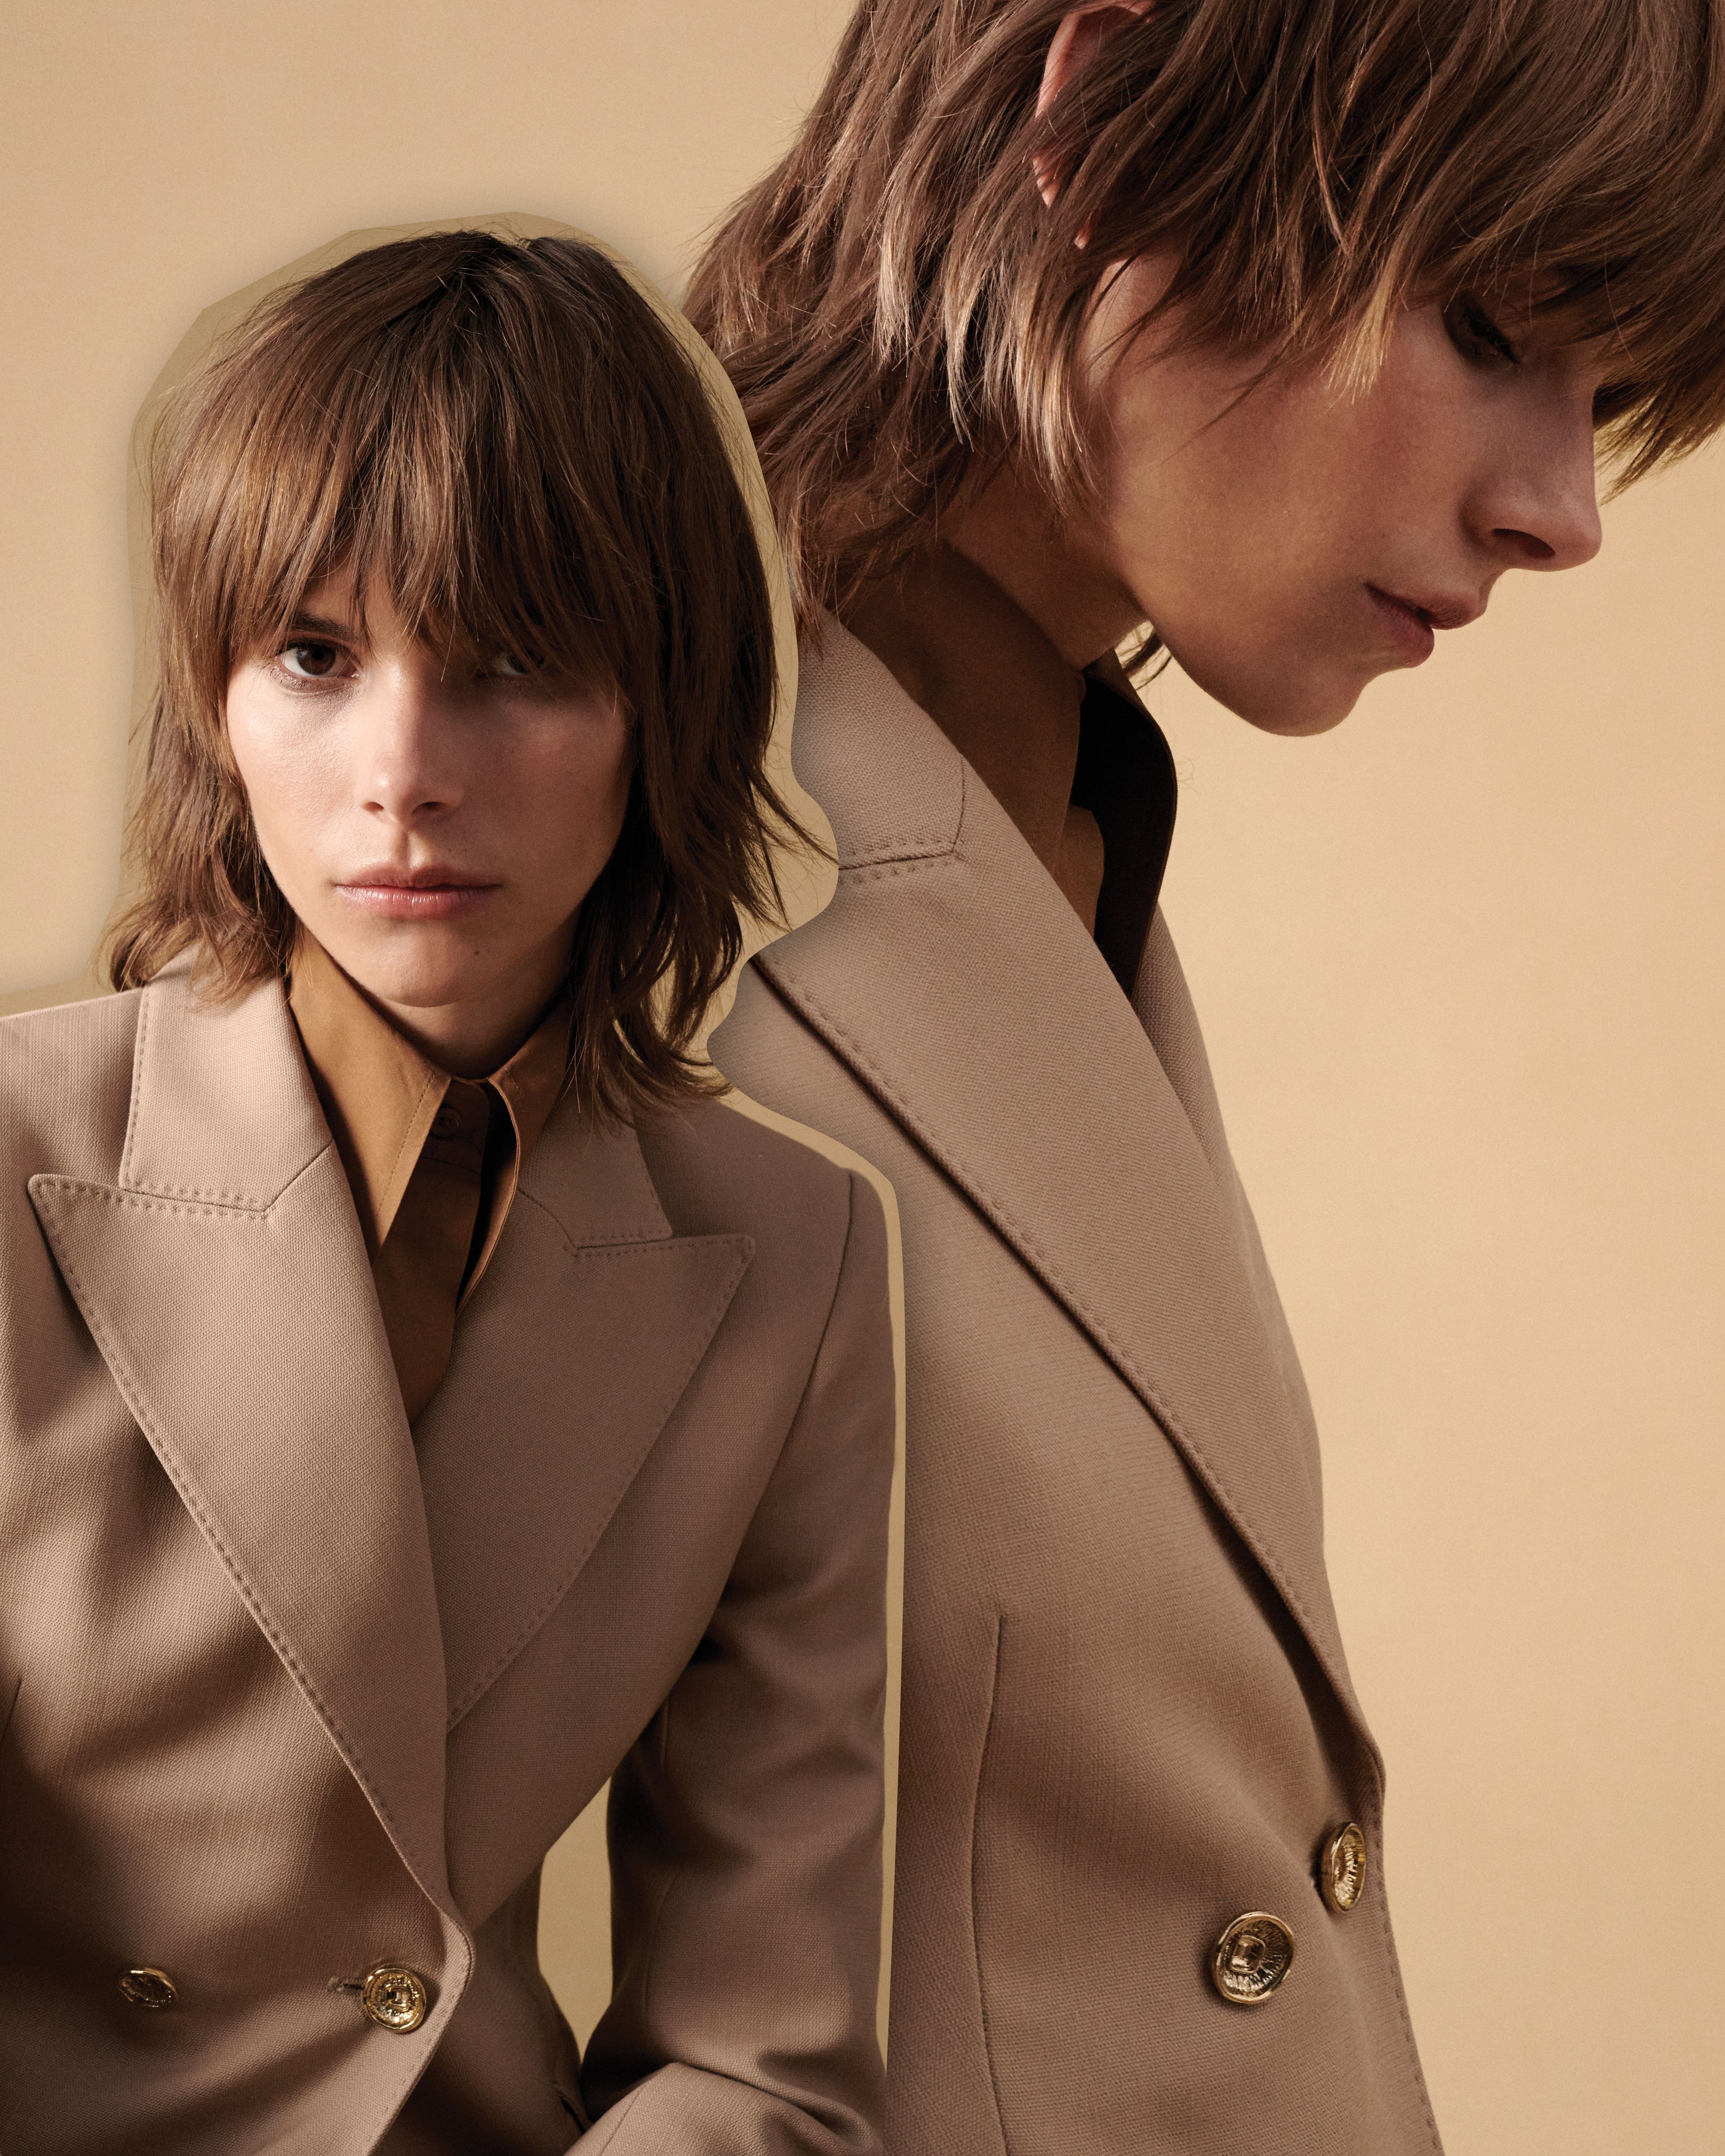 Model wearing a neutral toned jacket and shirt gazing at the camera